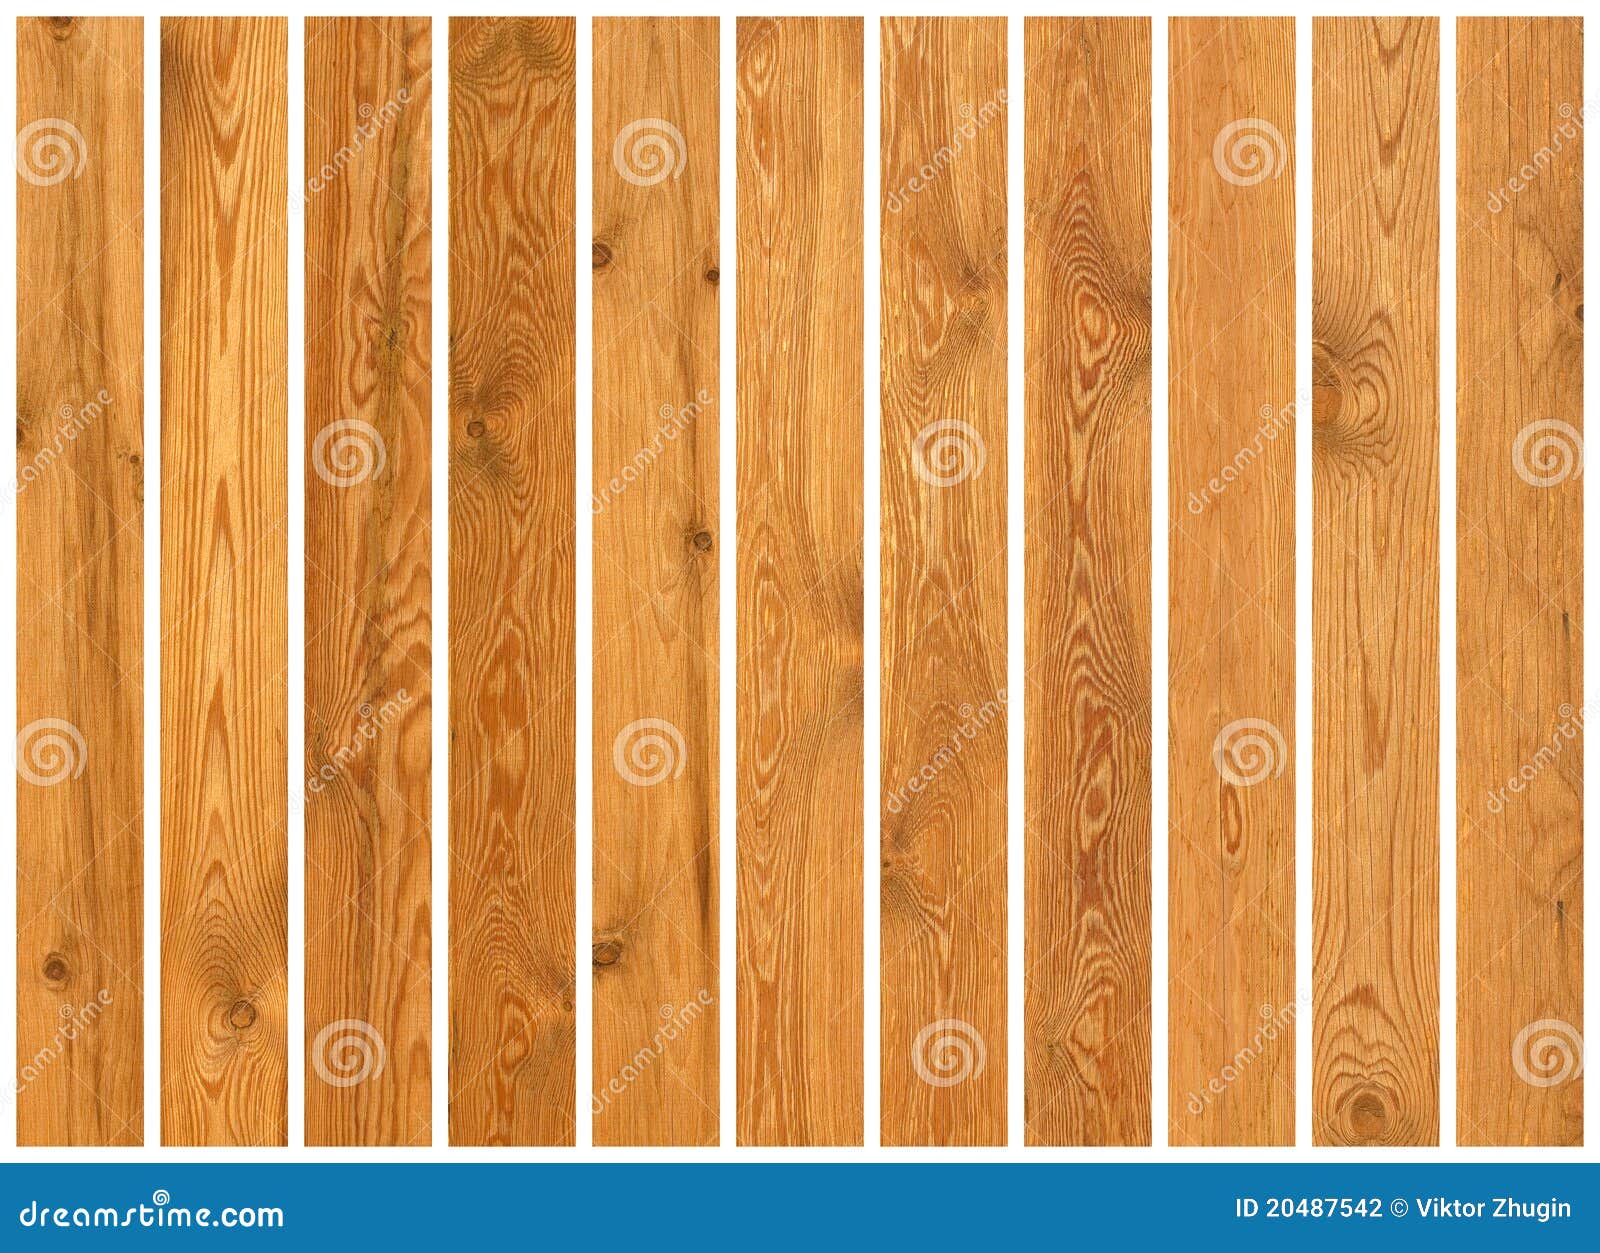 collection of wood planks textures